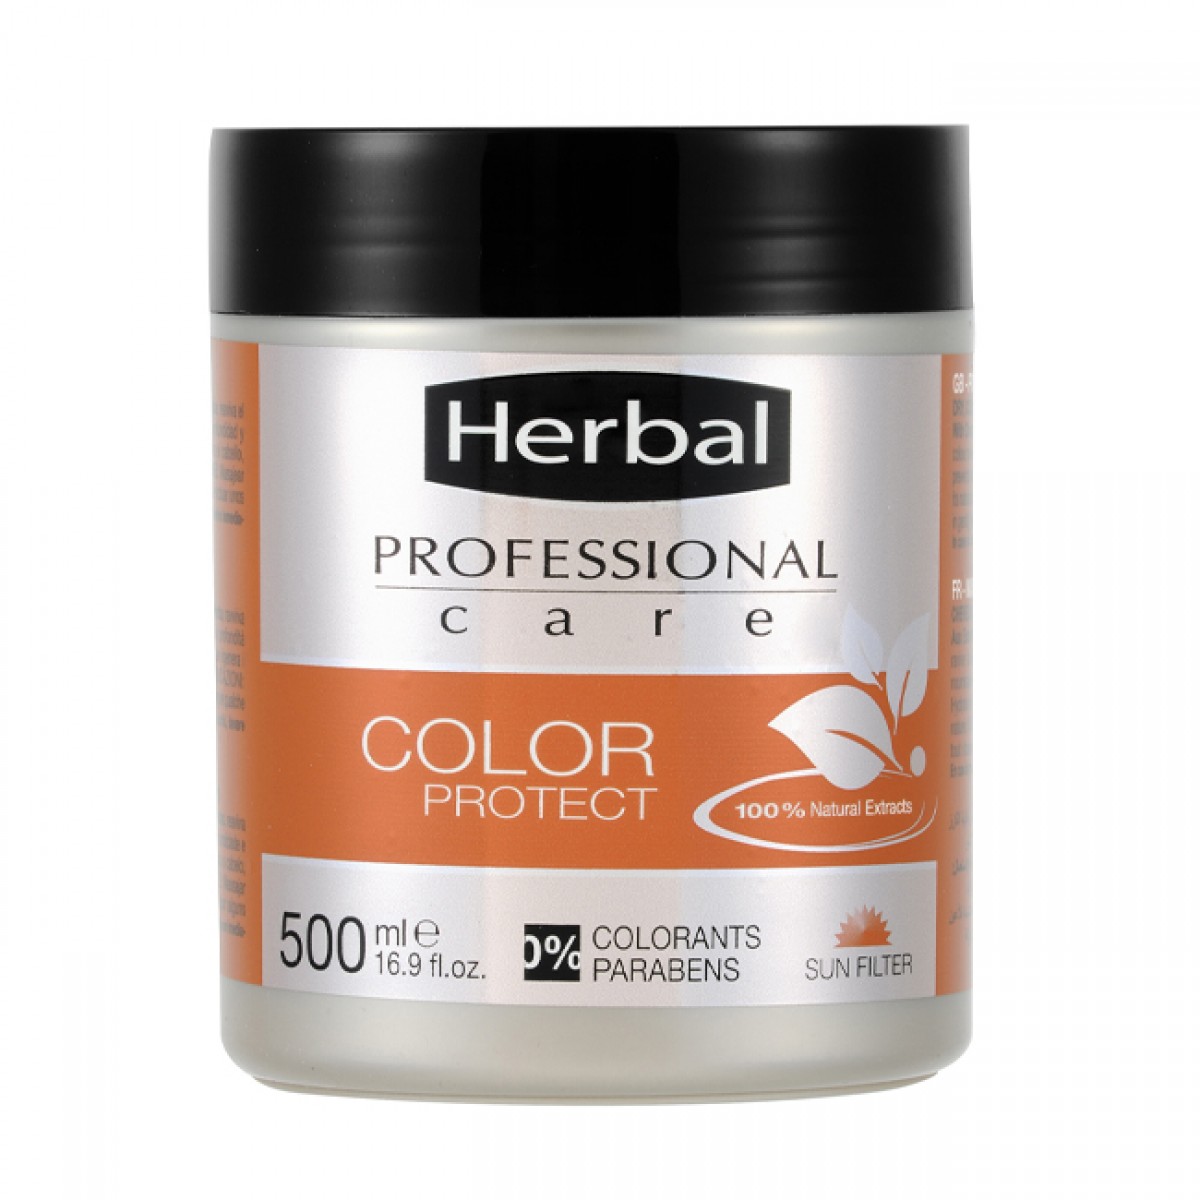 HERBAL PROFESSIONAL CARE MASK COLOR PROTECT 500 ml